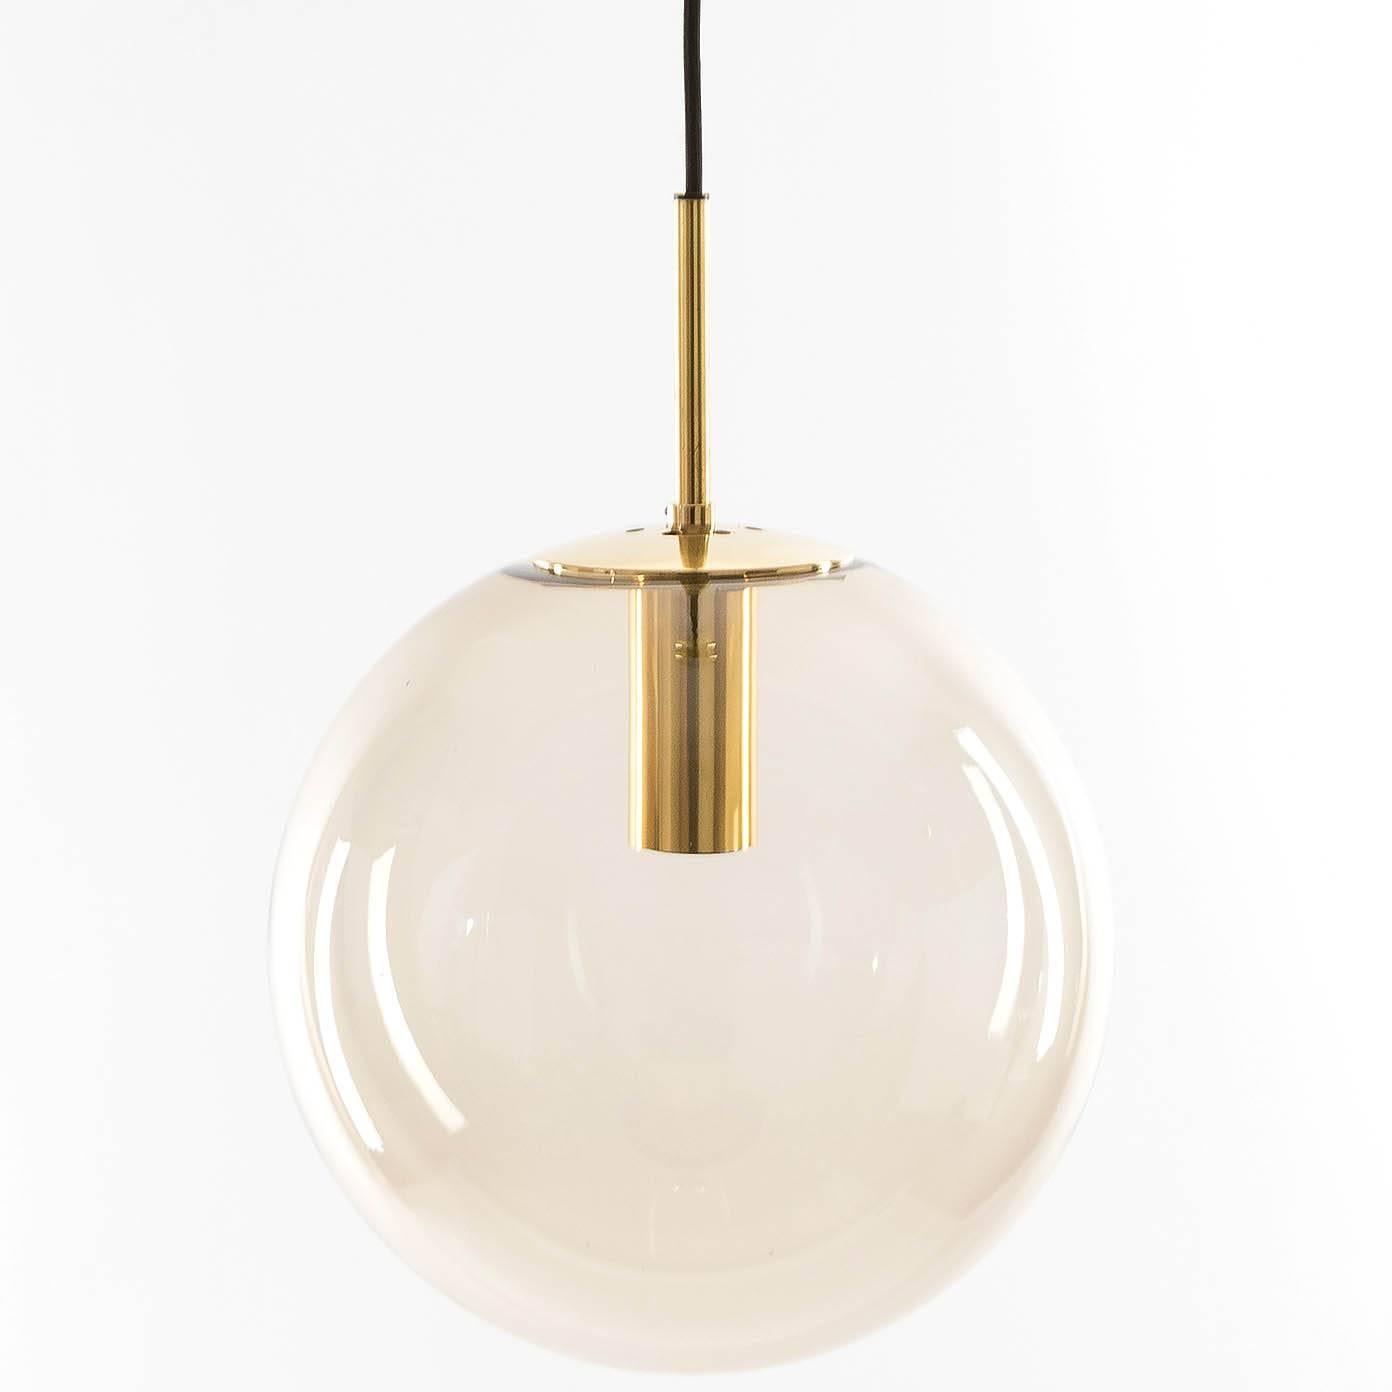 A large handblown glass globe pendant light by Glashütte Limburg, Germany, 1970s. Polished brass hardware. Smoke/amber/topaz/brown amethyst tone glass. Excellent condition, newly rewired. The cord can be customized to any length for free. Low 1